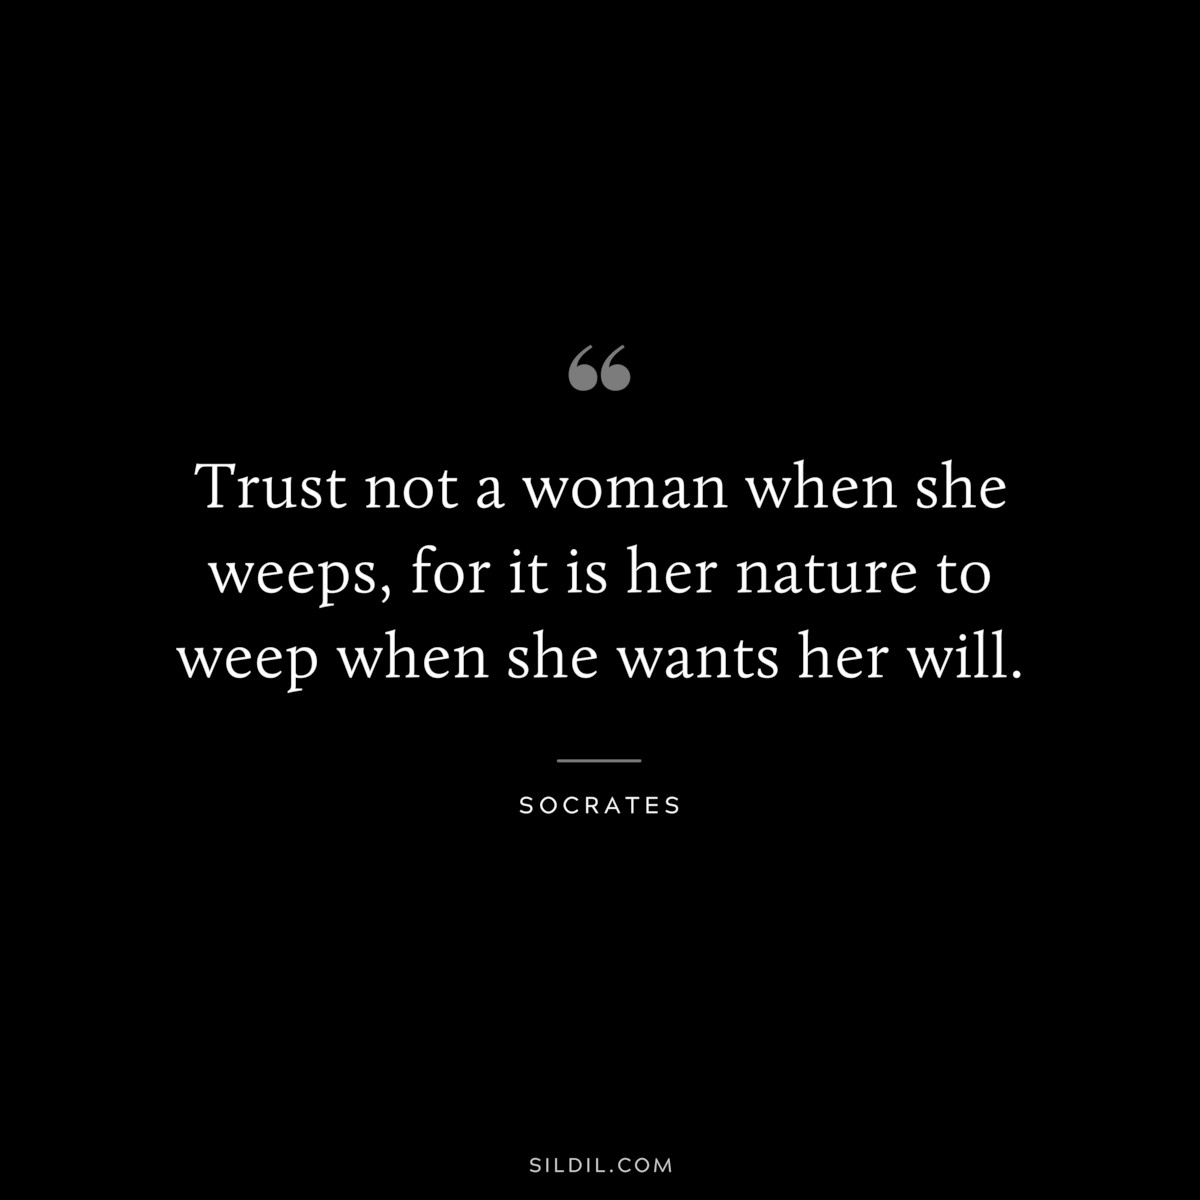 Trust not a woman when she weeps, for it is her nature to weep when she wants her will. ― Socrates